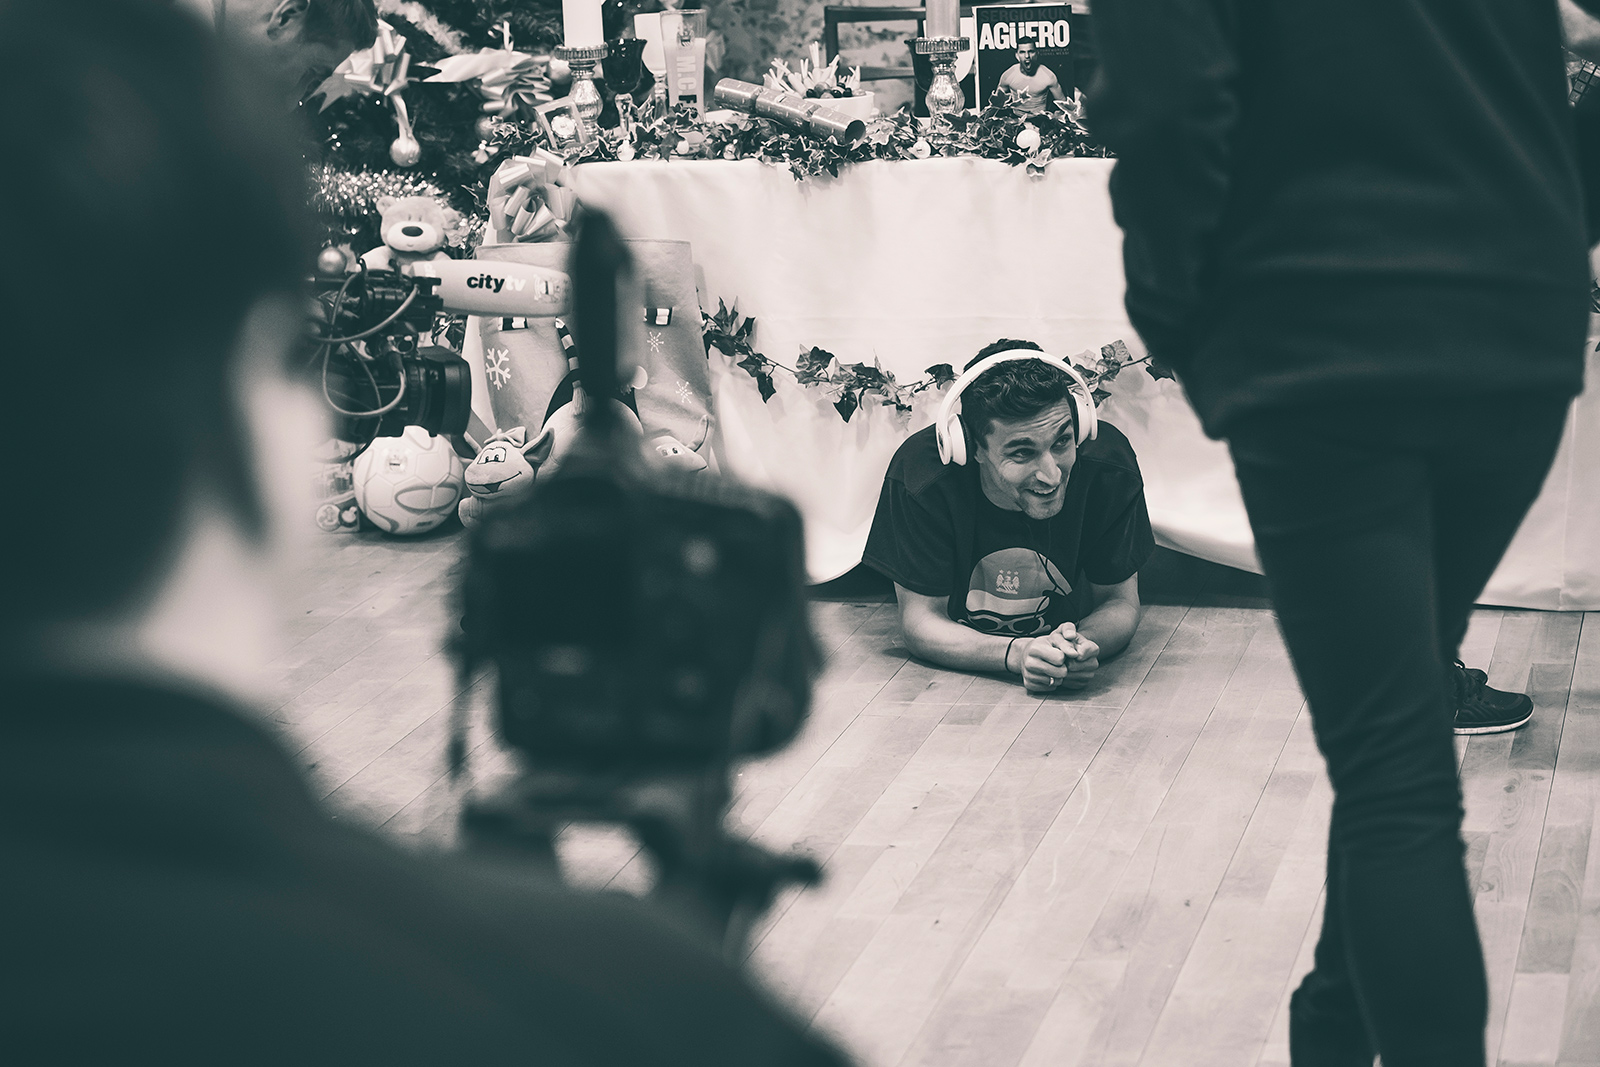 Christmas 2015 saw Absolute photographing this Christmas scene for Manchester City FC